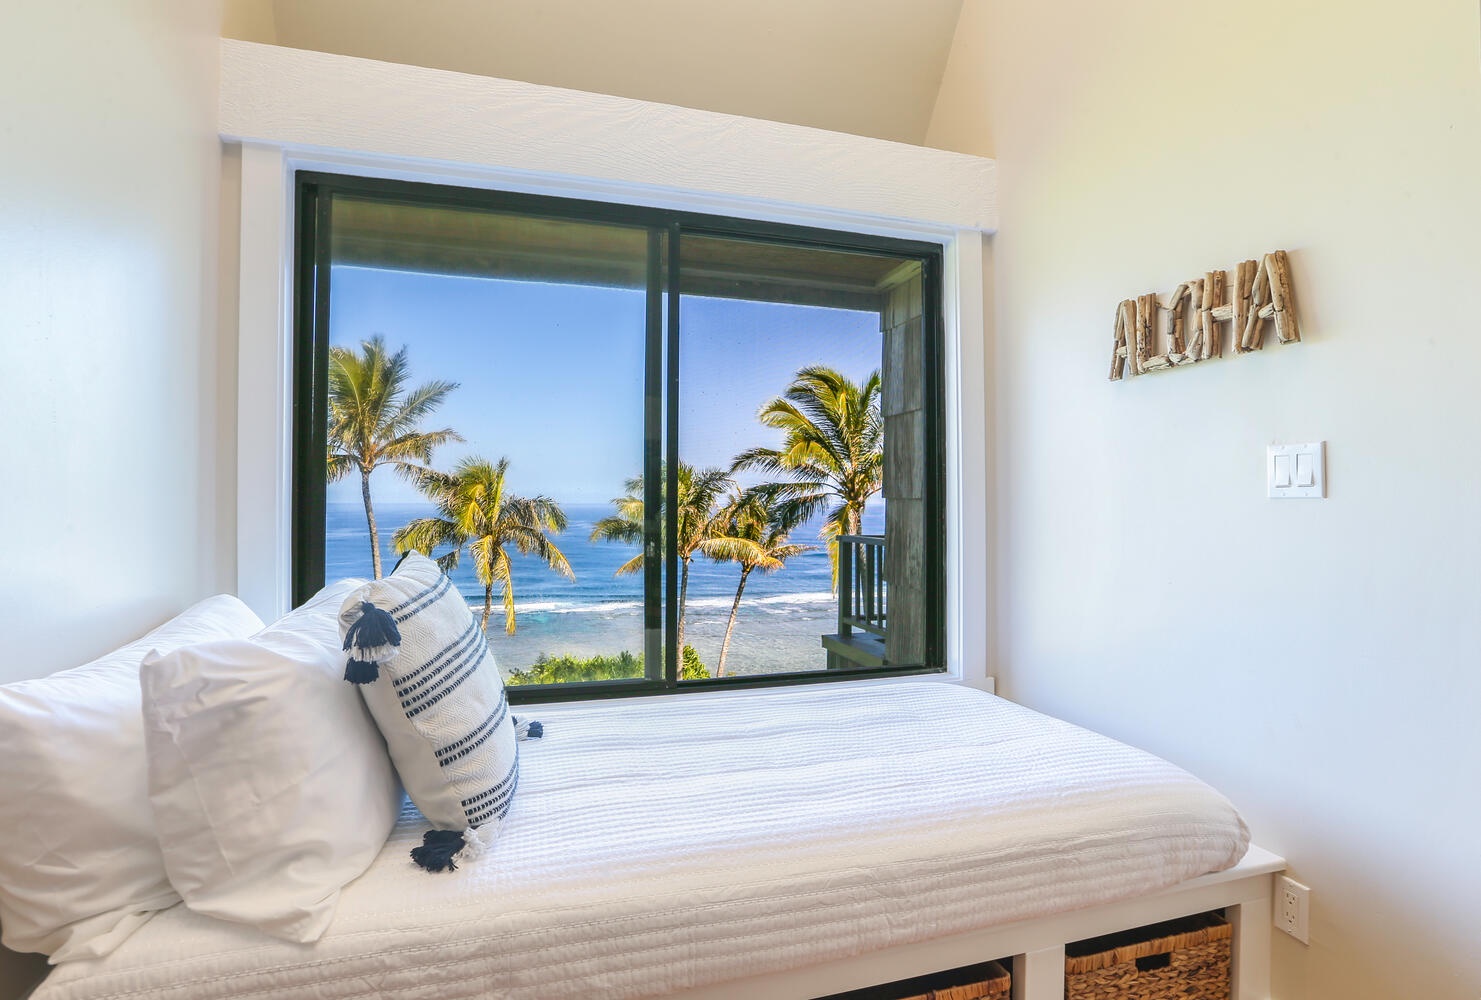 Princeville Vacation Rentals, Sealodge J8 - There's also a twin XL daybed in the living area to sleep 1 additional guest